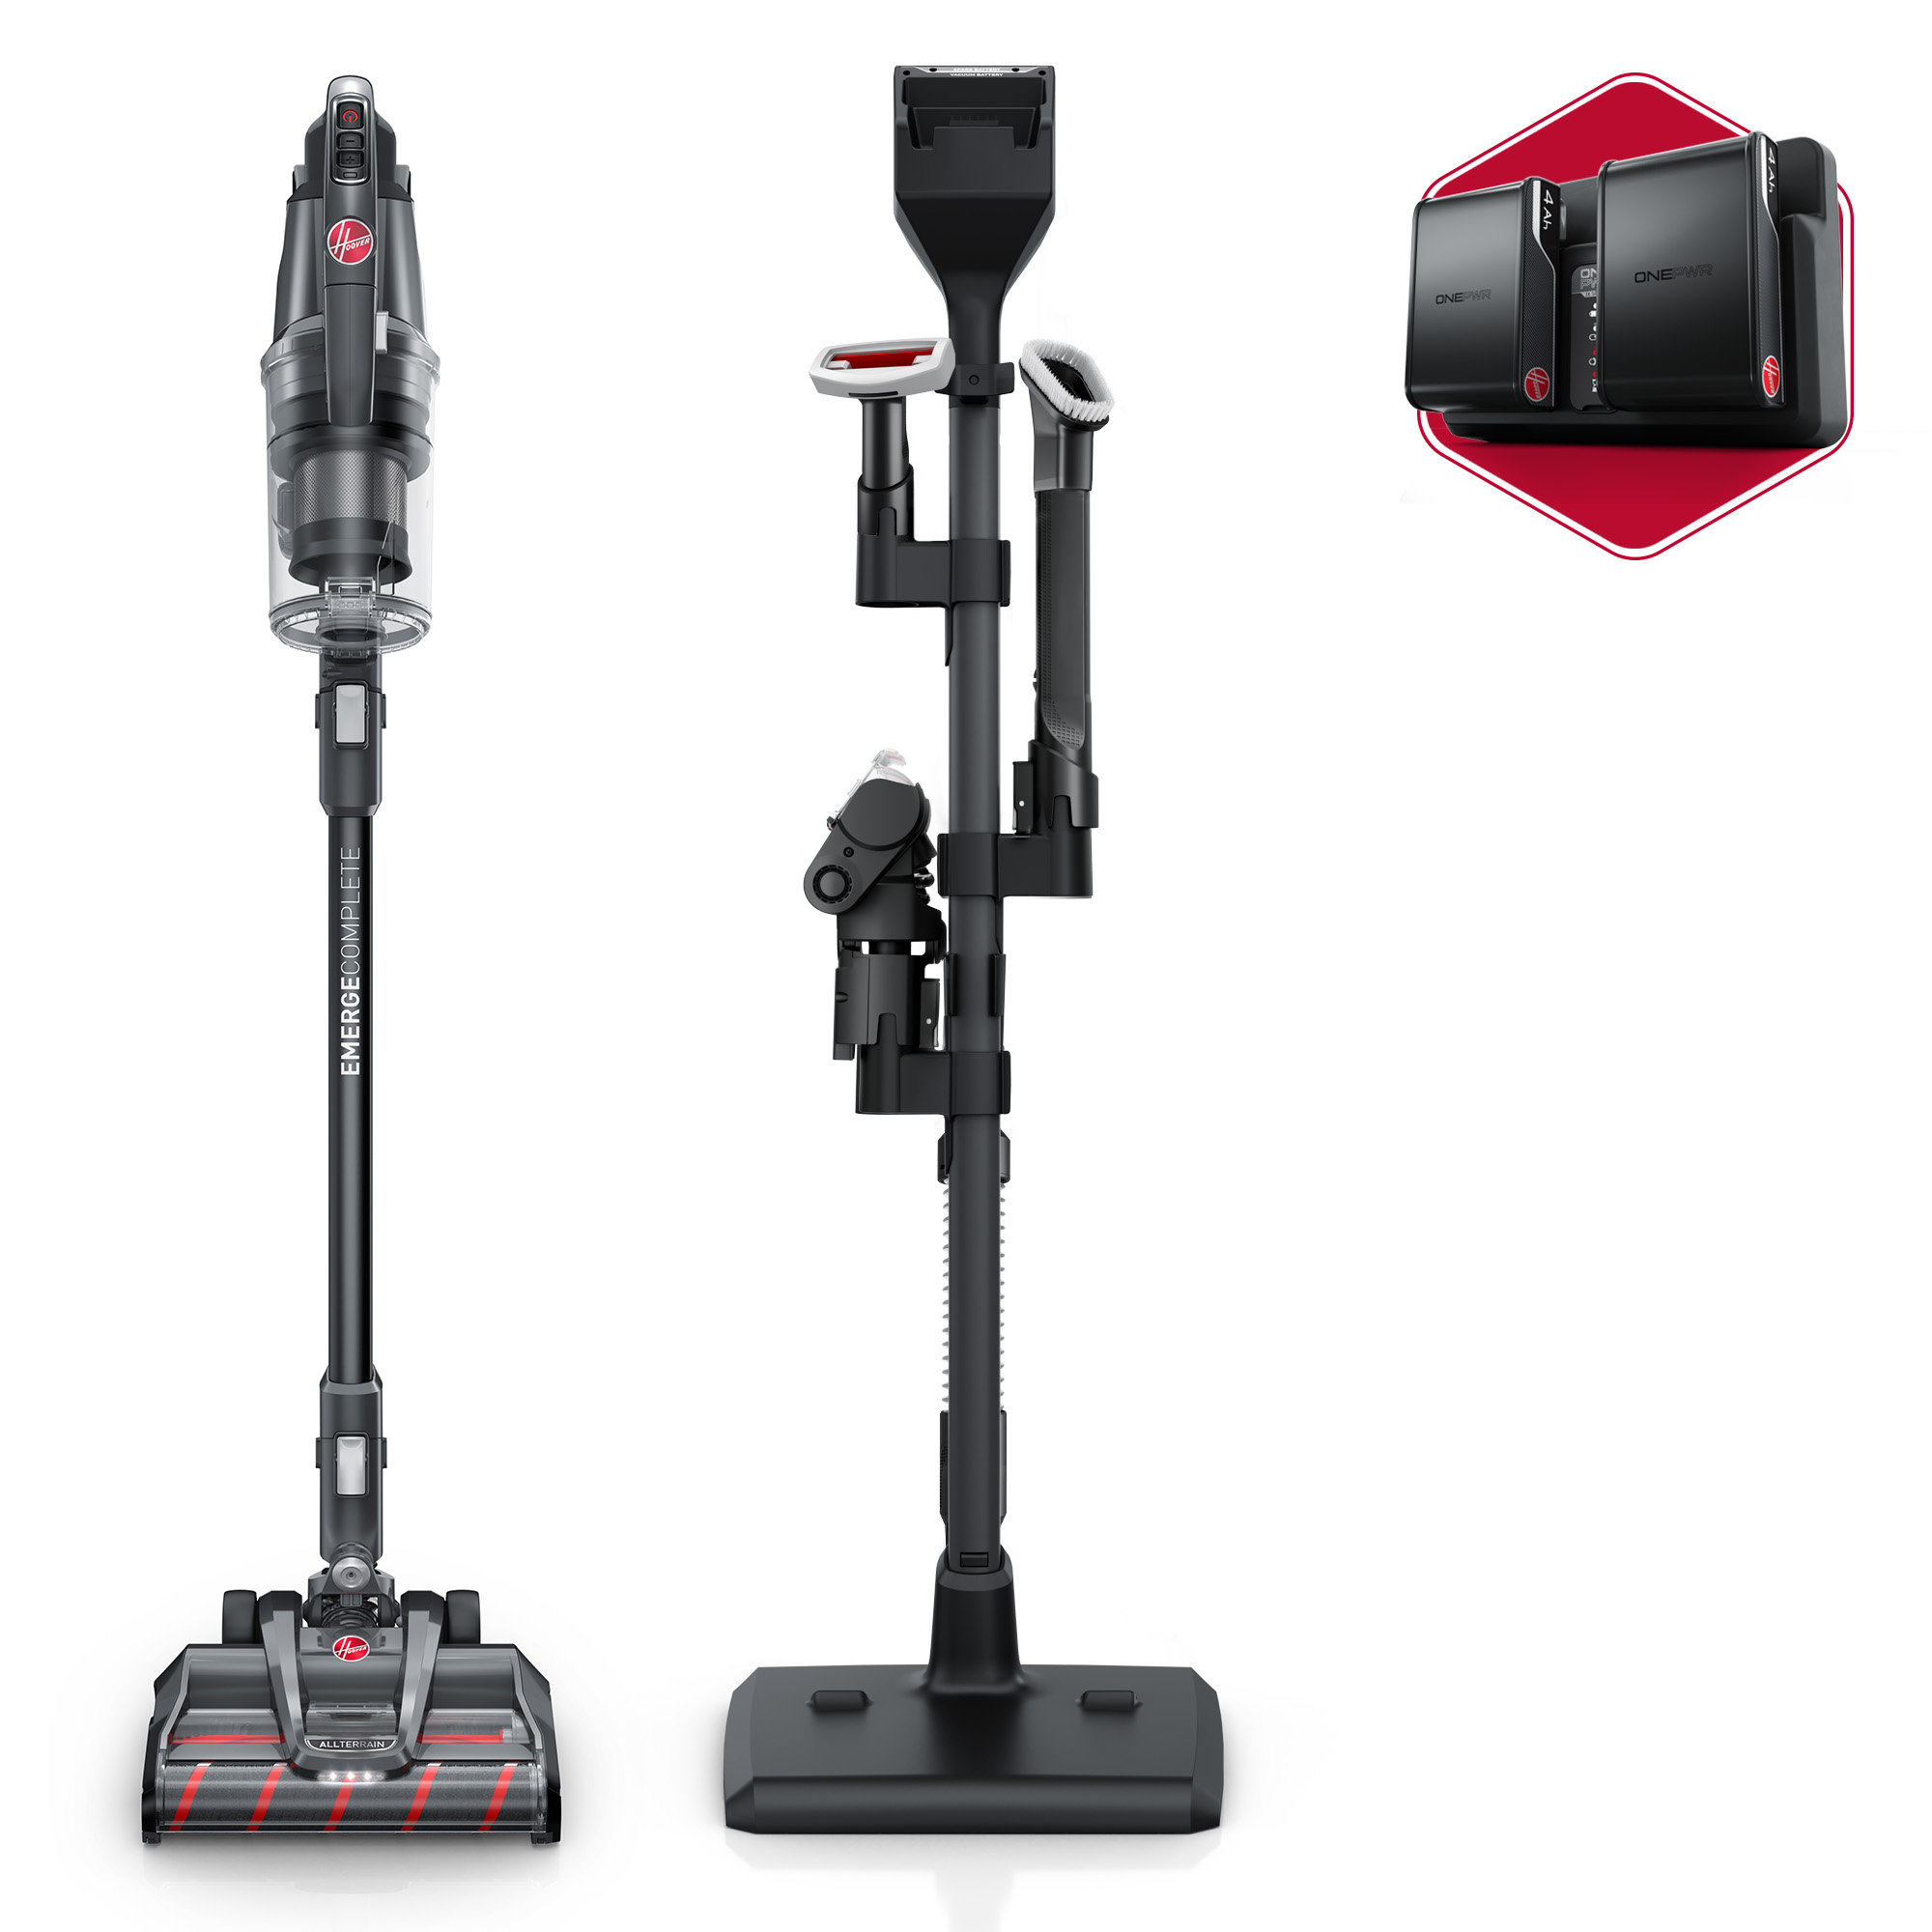 IRIS USA High Power Cordless Stick Vacuum Cleaner with Replaceable